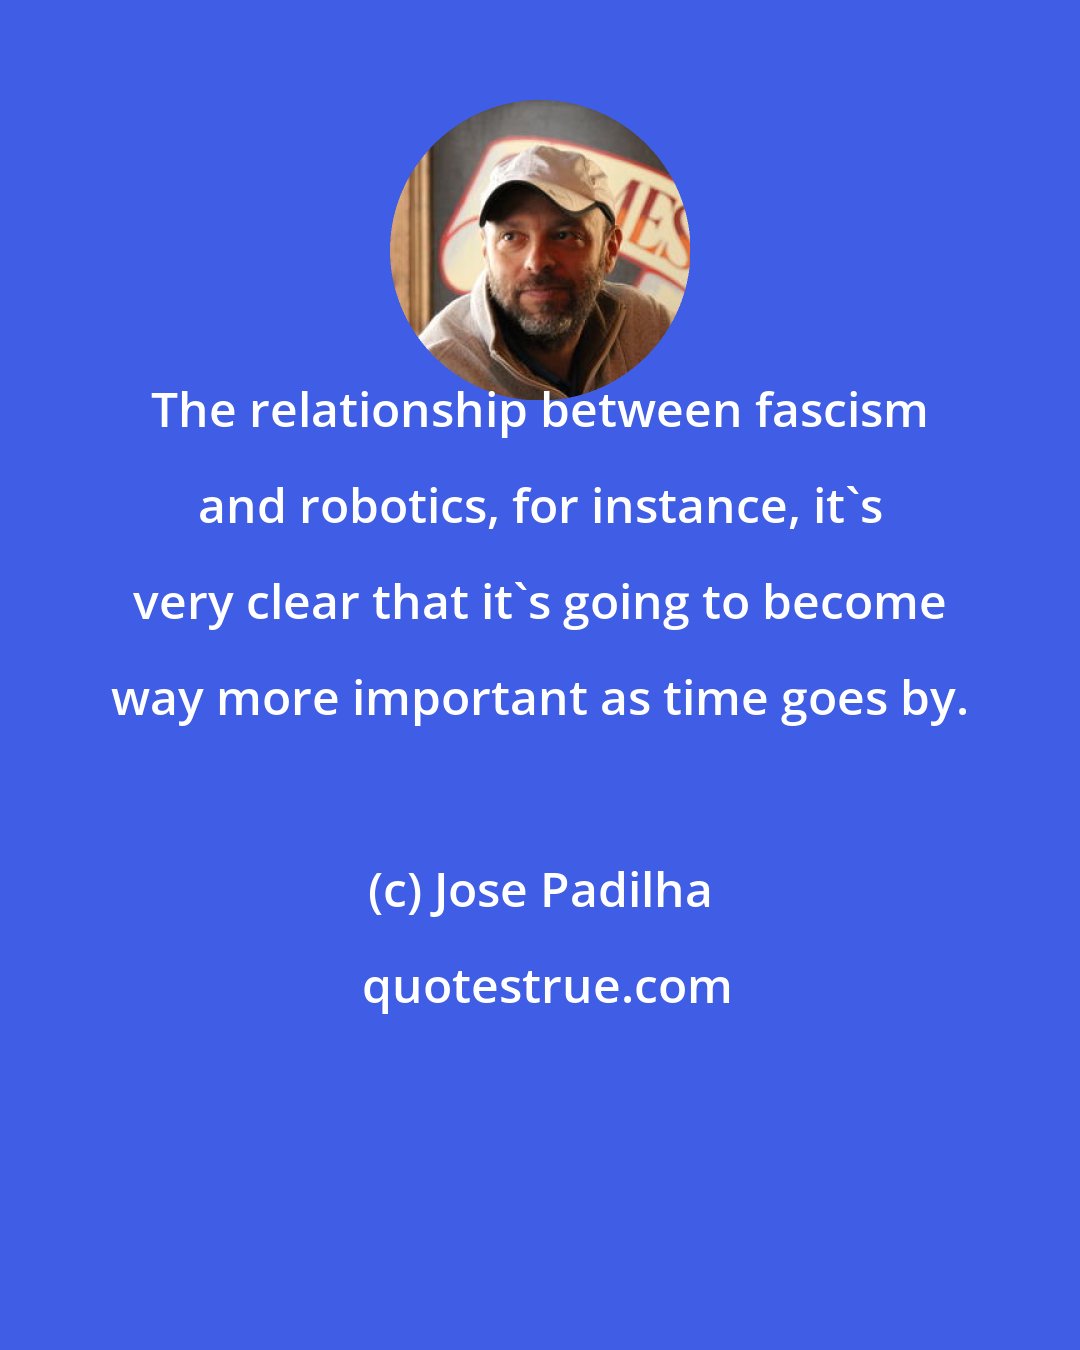 Jose Padilha: The relationship between fascism and robotics, for instance, it's very clear that it's going to become way more important as time goes by.